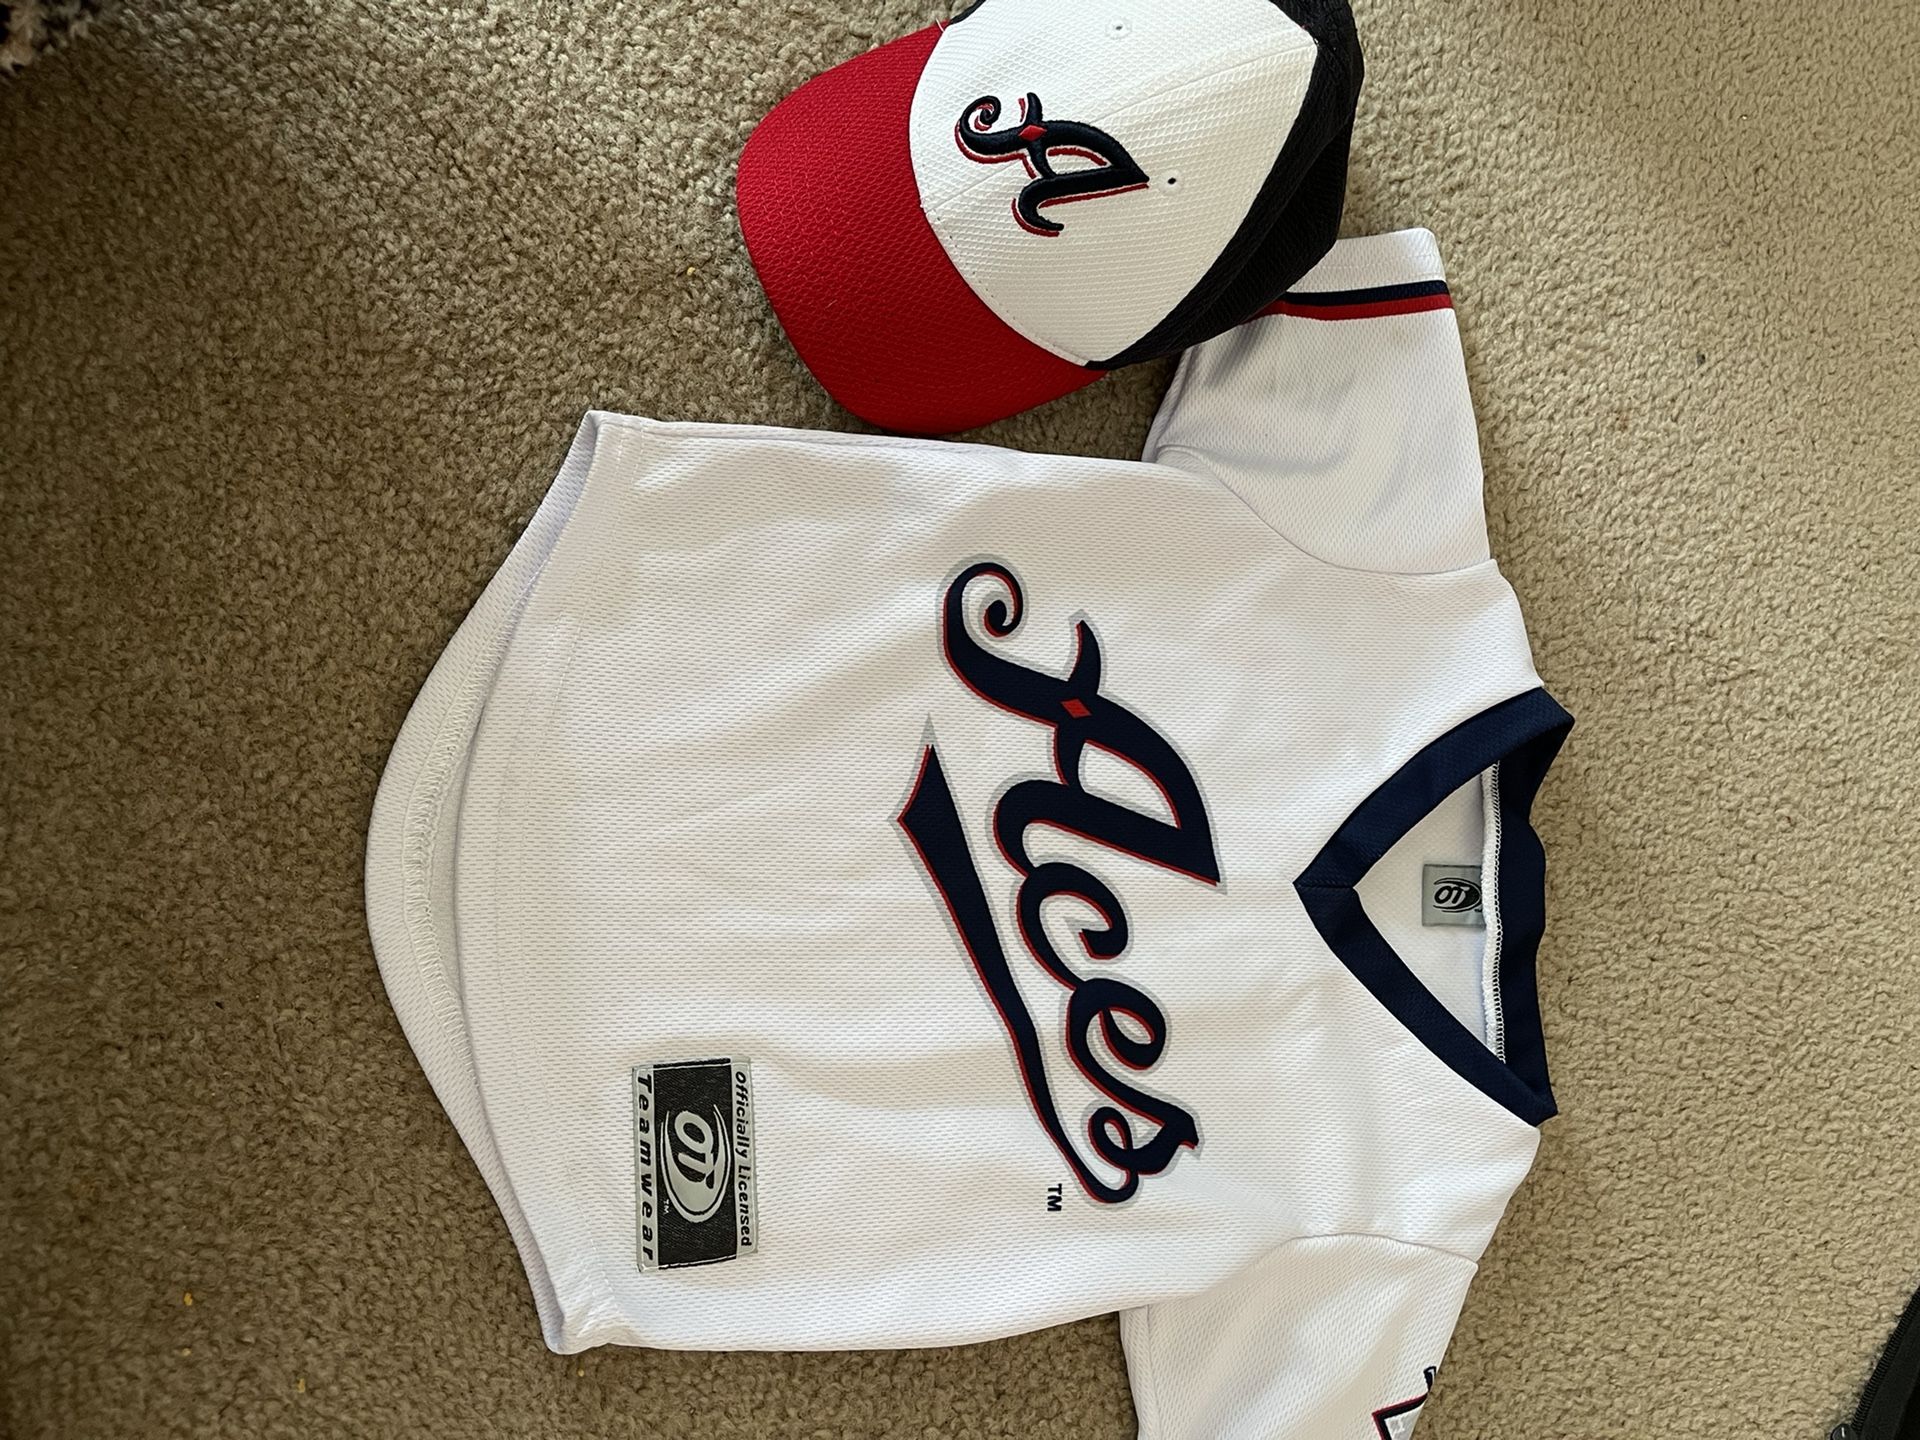 Aces Toddler Jersey Shirt And Hat